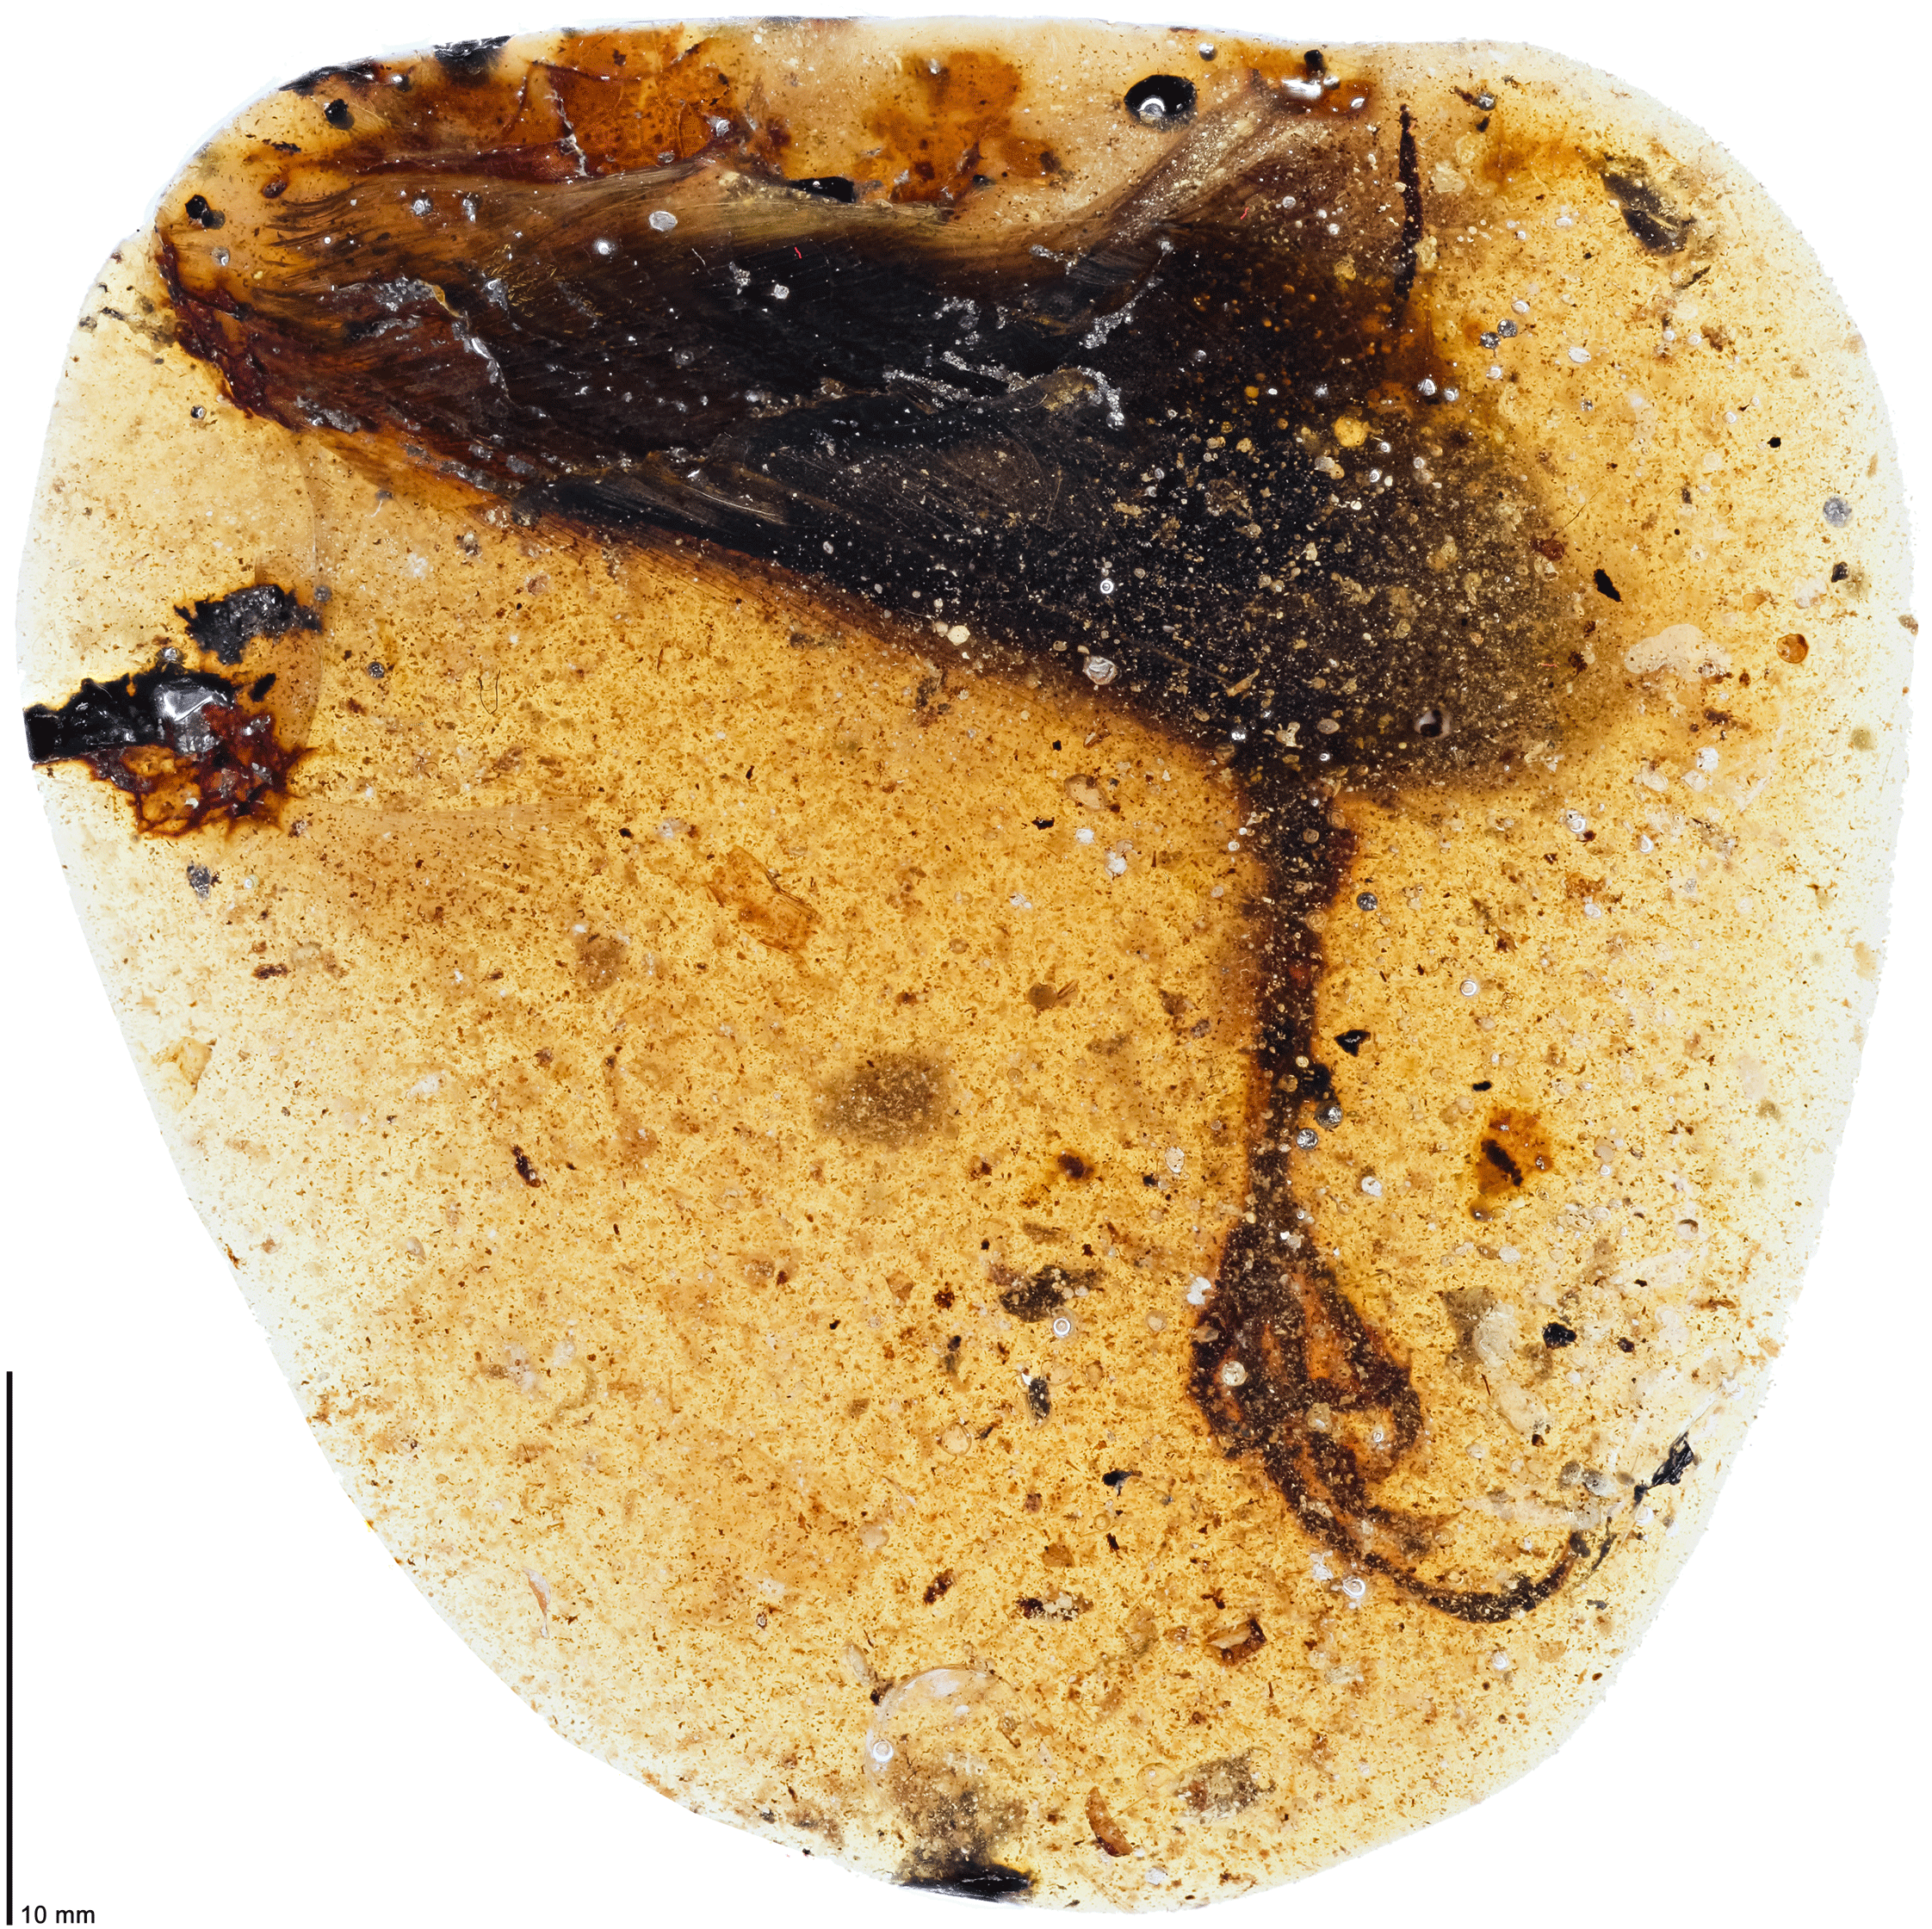 Researchers got the amber from a local amber trader who didn’t know what animal the strange foot belonged to